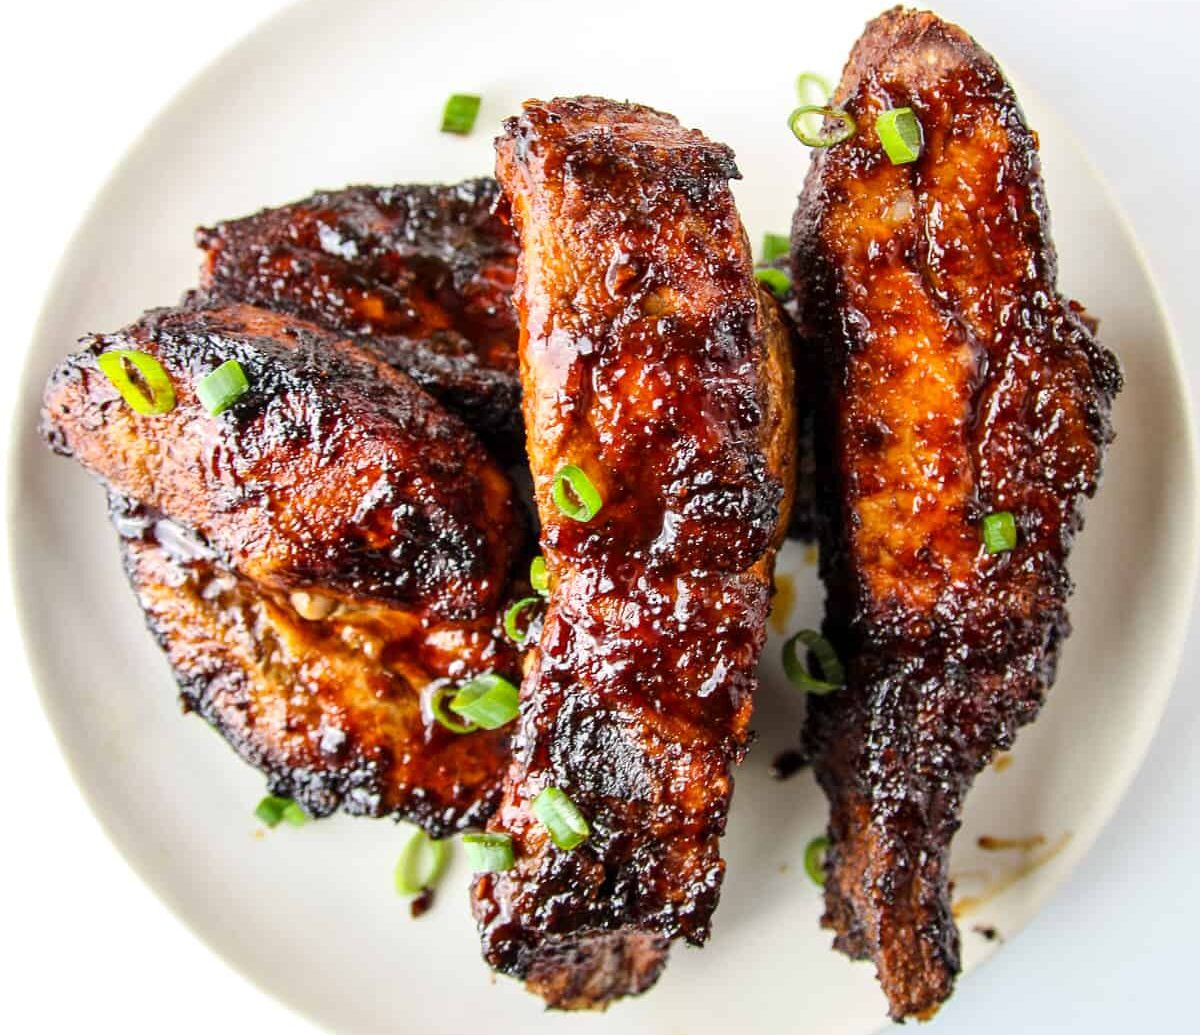 How do I slow cook boneless ribs in an air fryer?